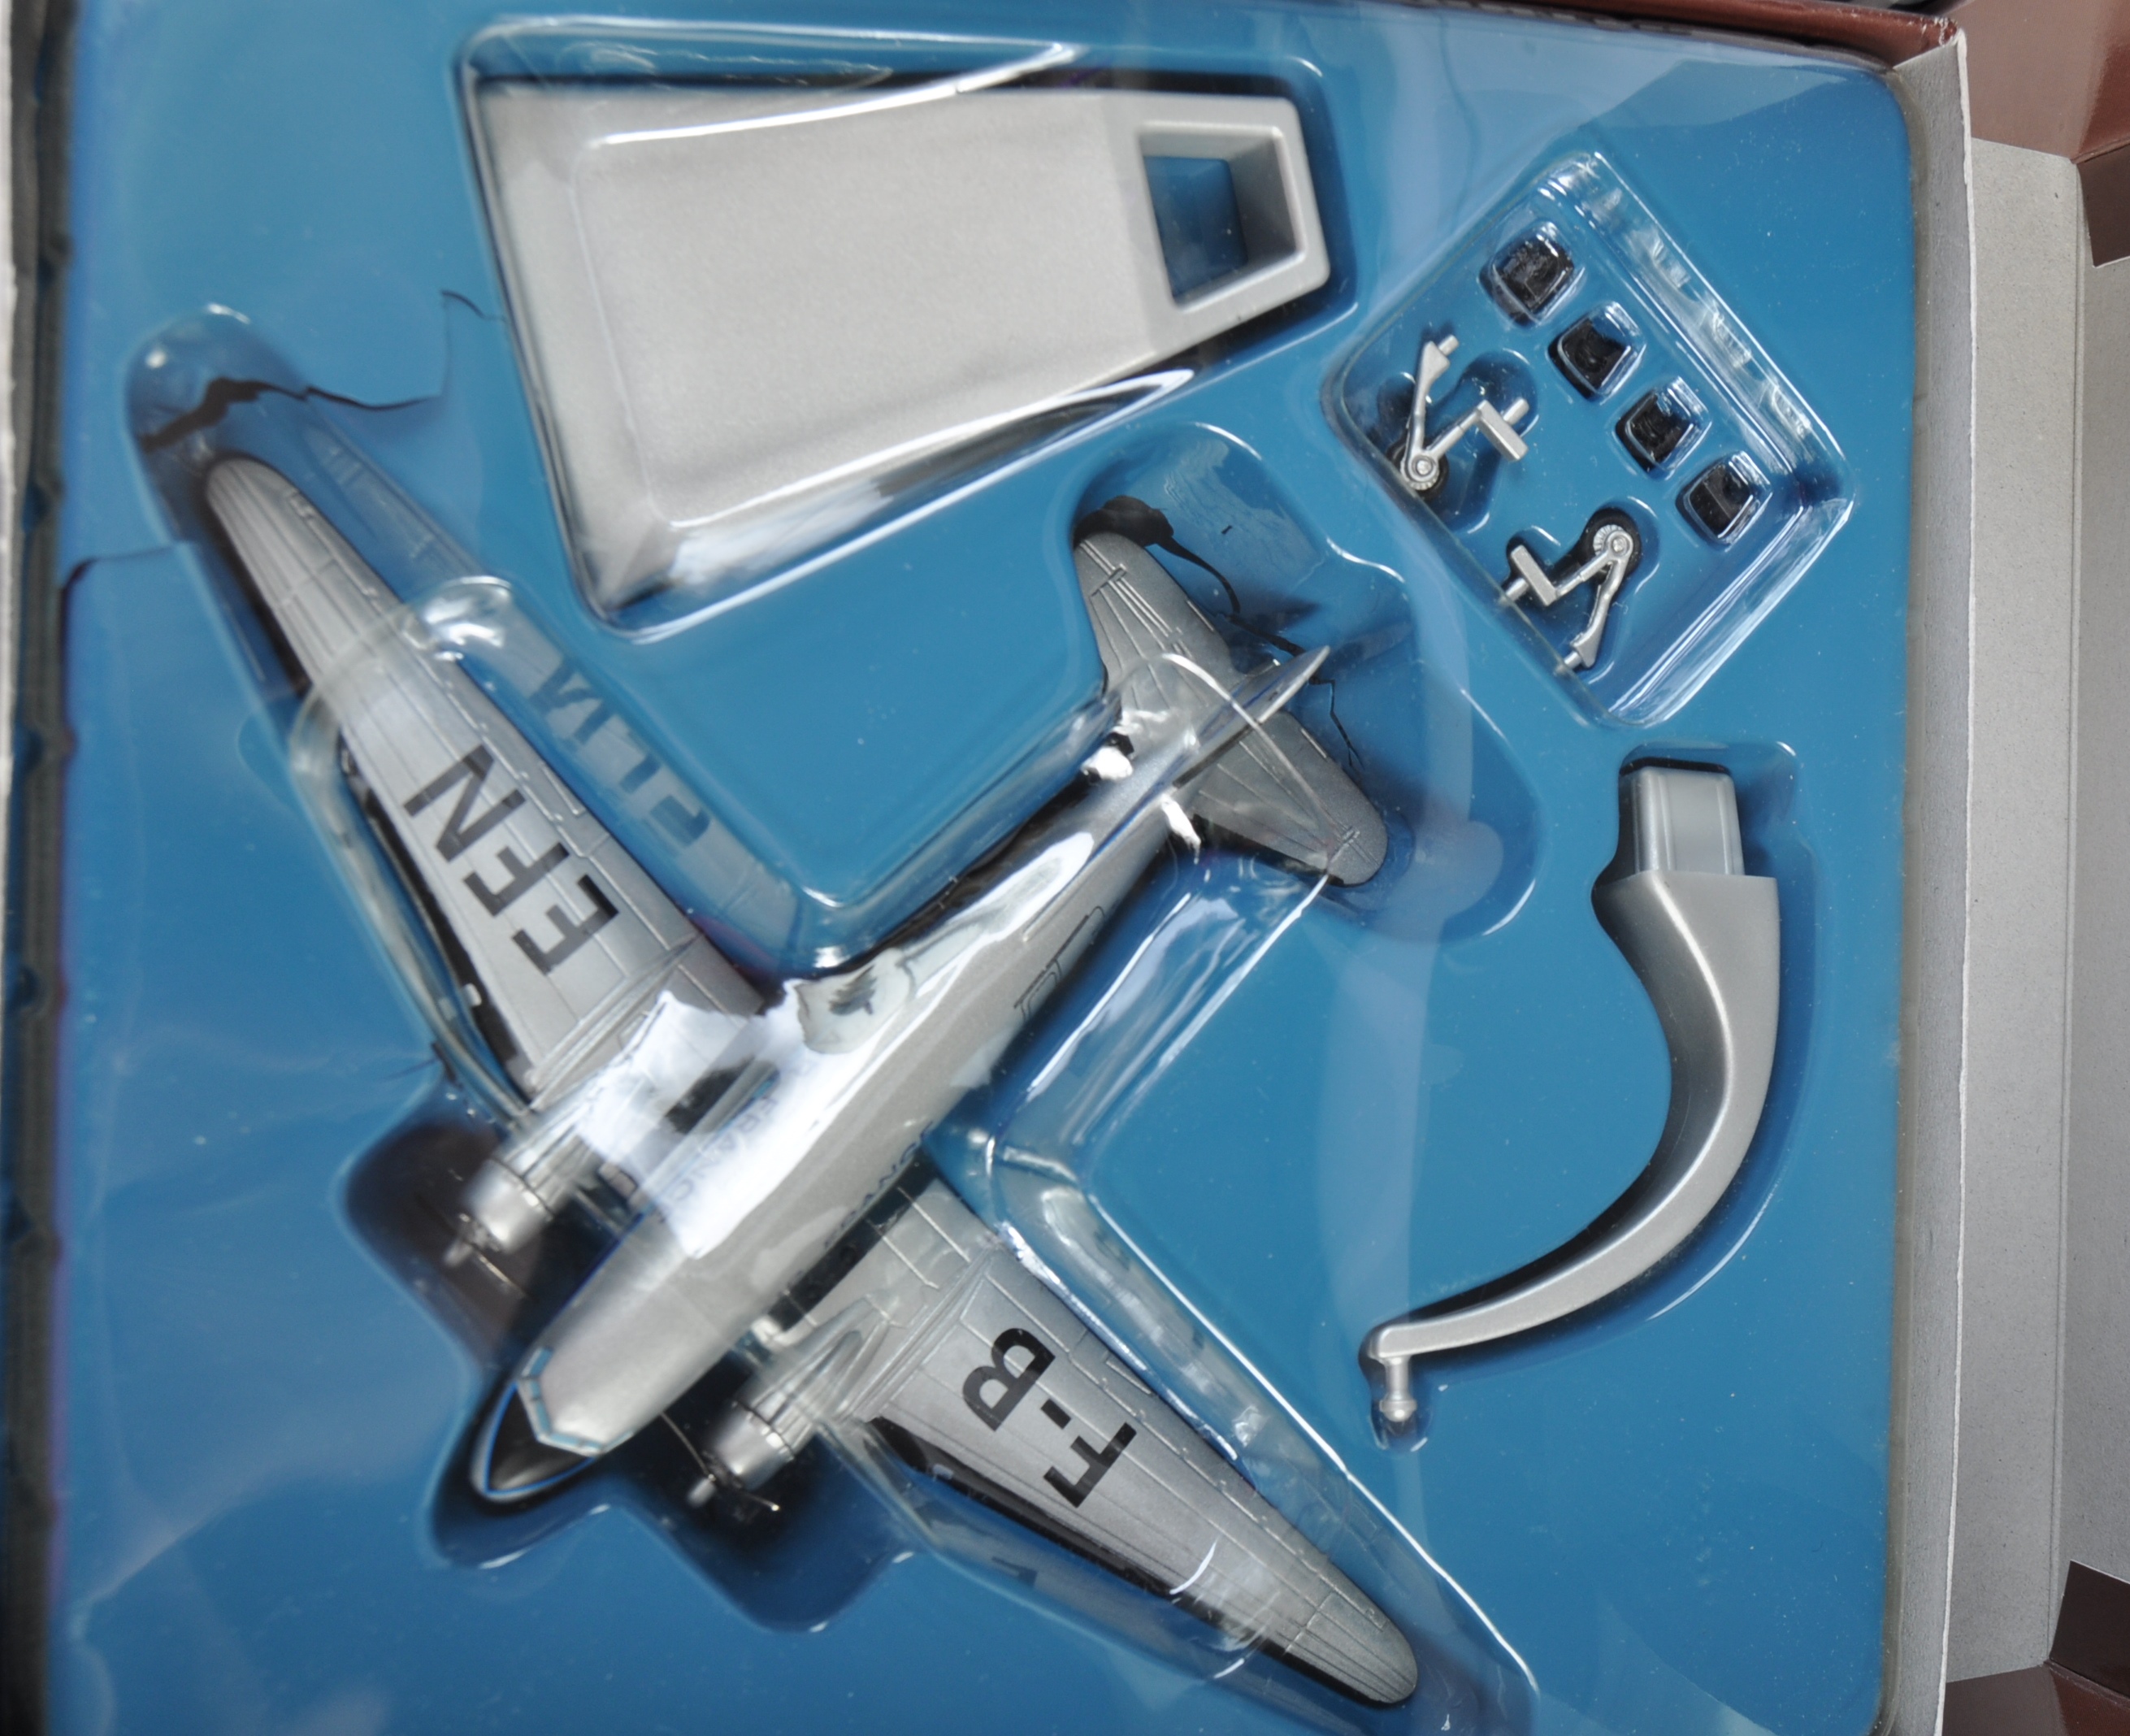 COLLECTION OF CORGI AVIATION ARCHIVE DIECAST MODEL PLANES - Image 5 of 7